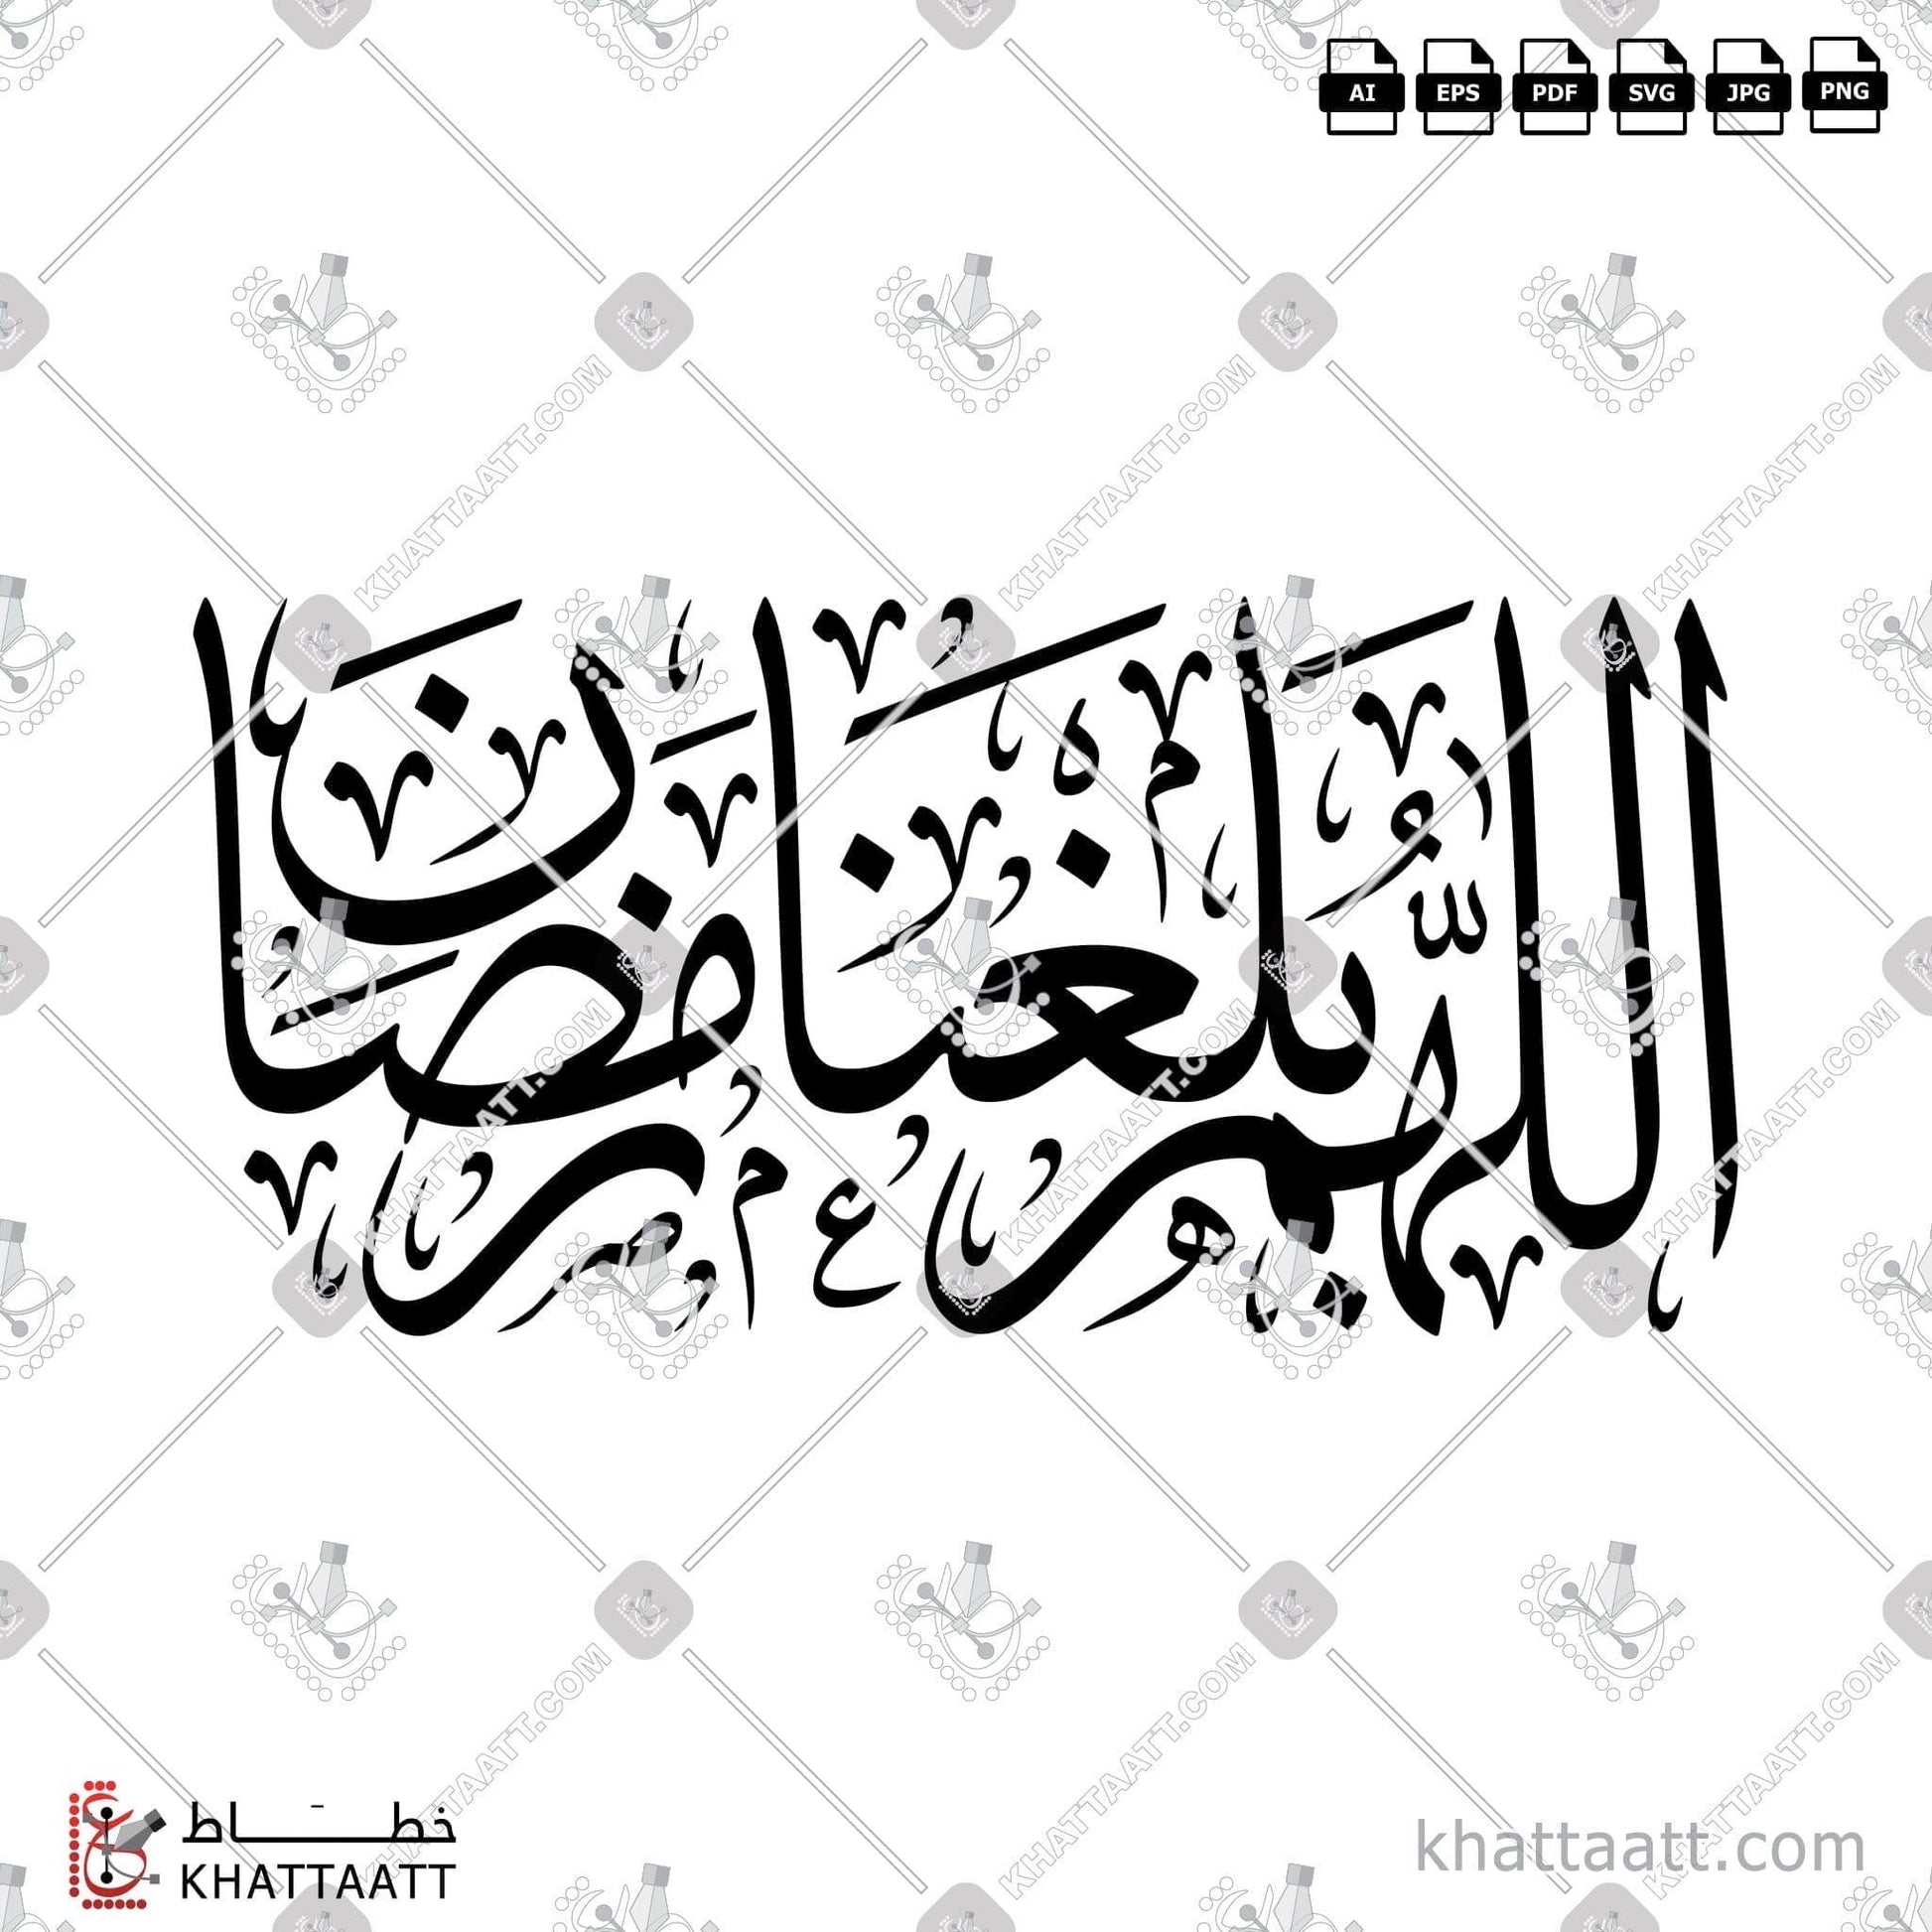 Download Arabic Calligraphy of اللهم بلغنا رمضان in Thuluth - خط الثلث in vector and .png